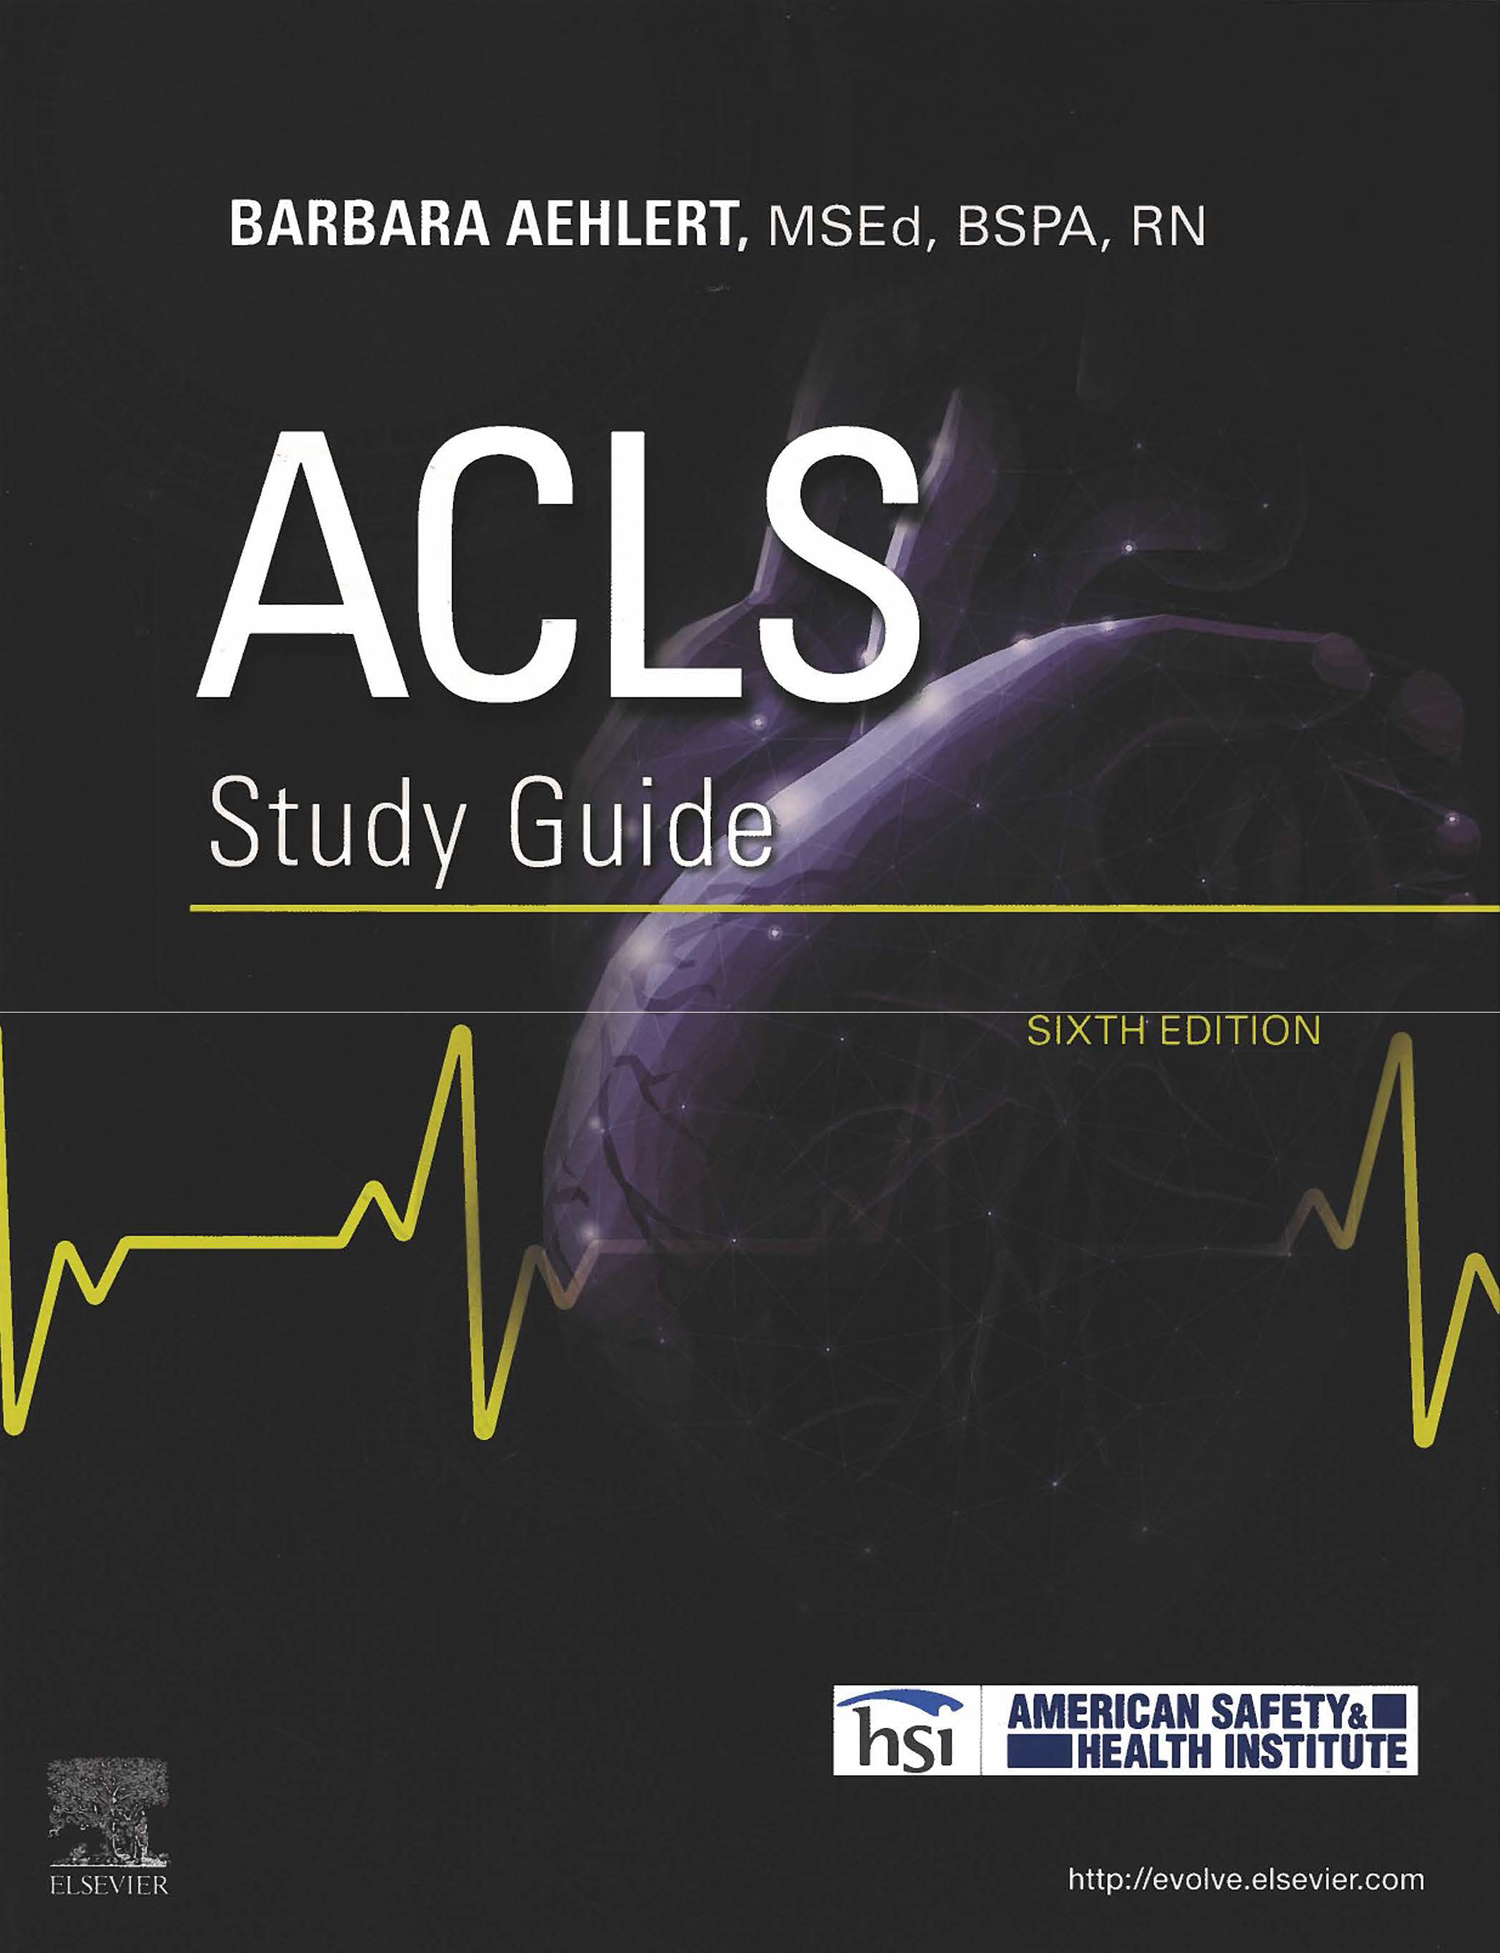 ACLS Study Guide, 6th Ed.